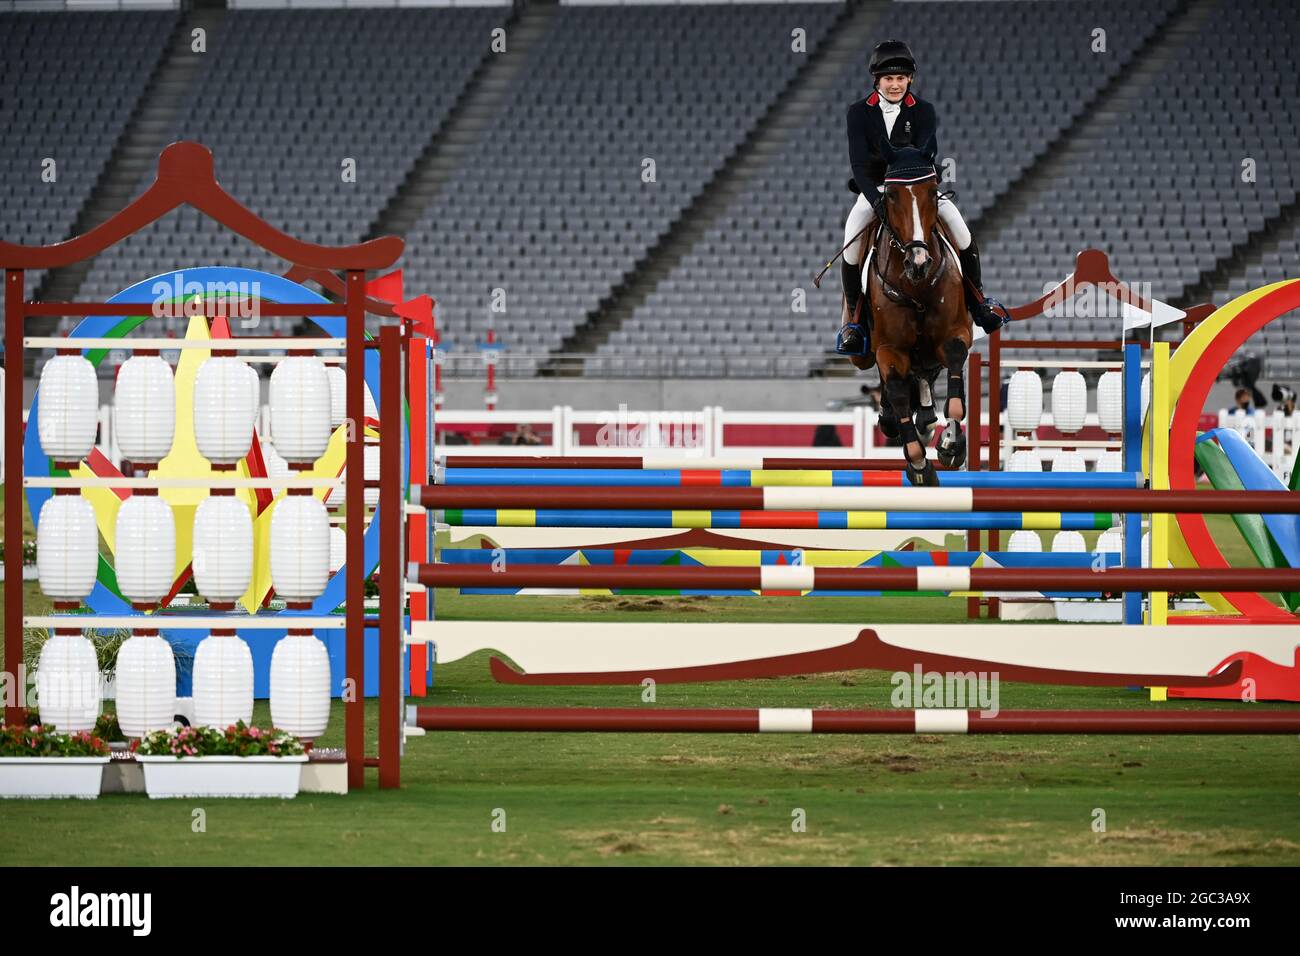 Tokyo, Japan. 6th Aug, 2021. Kate French of Britain competes in the riding portion of the women's individual of modern pentathlon at Tokyo 2020 Olympic Games, in Tokyo, Japan, Aug. 6, 2021. Credit: Dai Tianfang/Xinhua/Alamy Live News Stock Photo